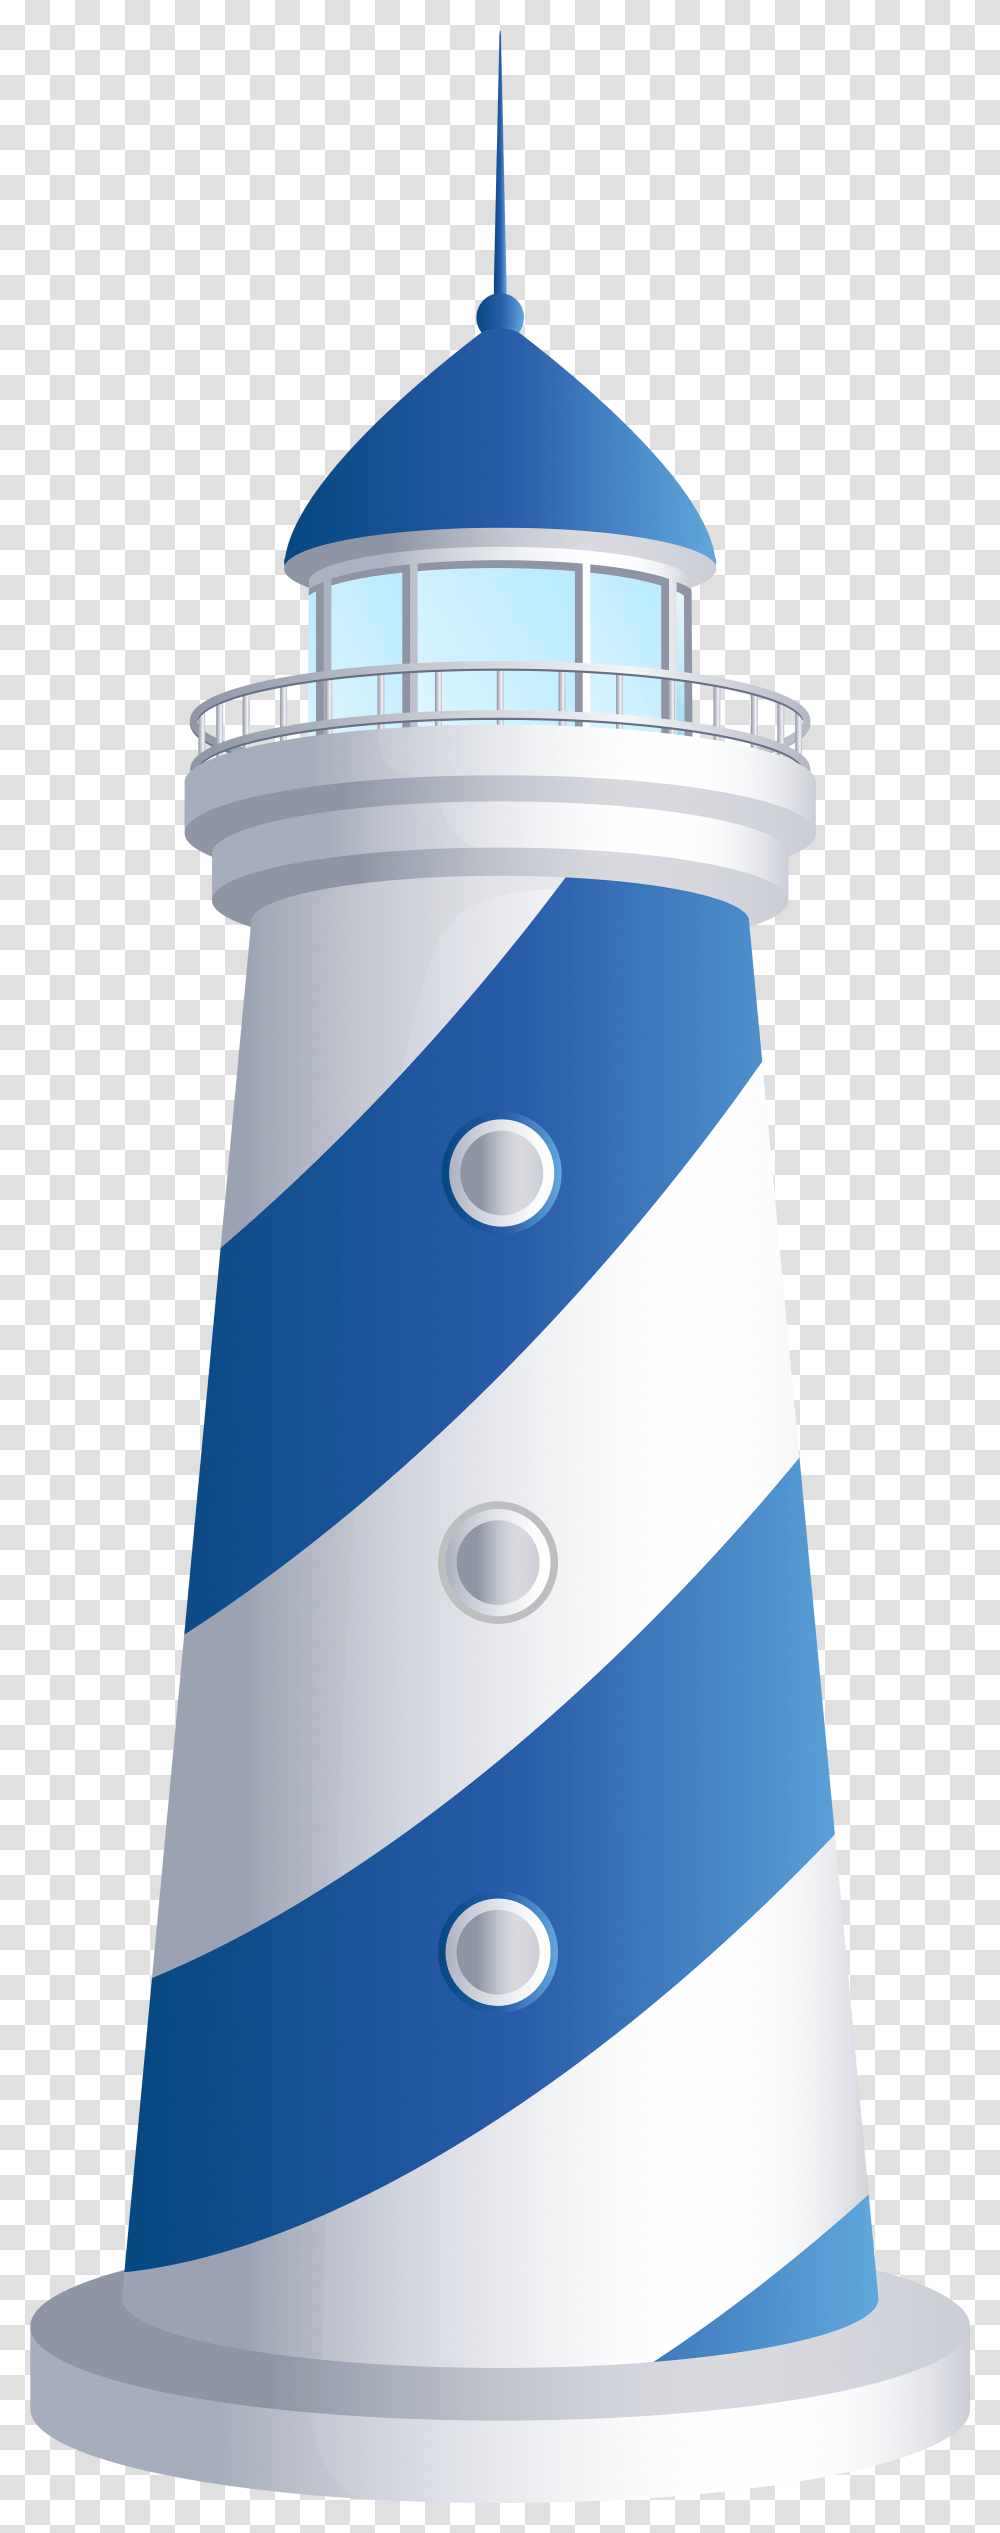 Lighthouse Clip Art Image Cartoon Lighthouse White And Blue, Bottle, Tie, Accessories Transparent Png